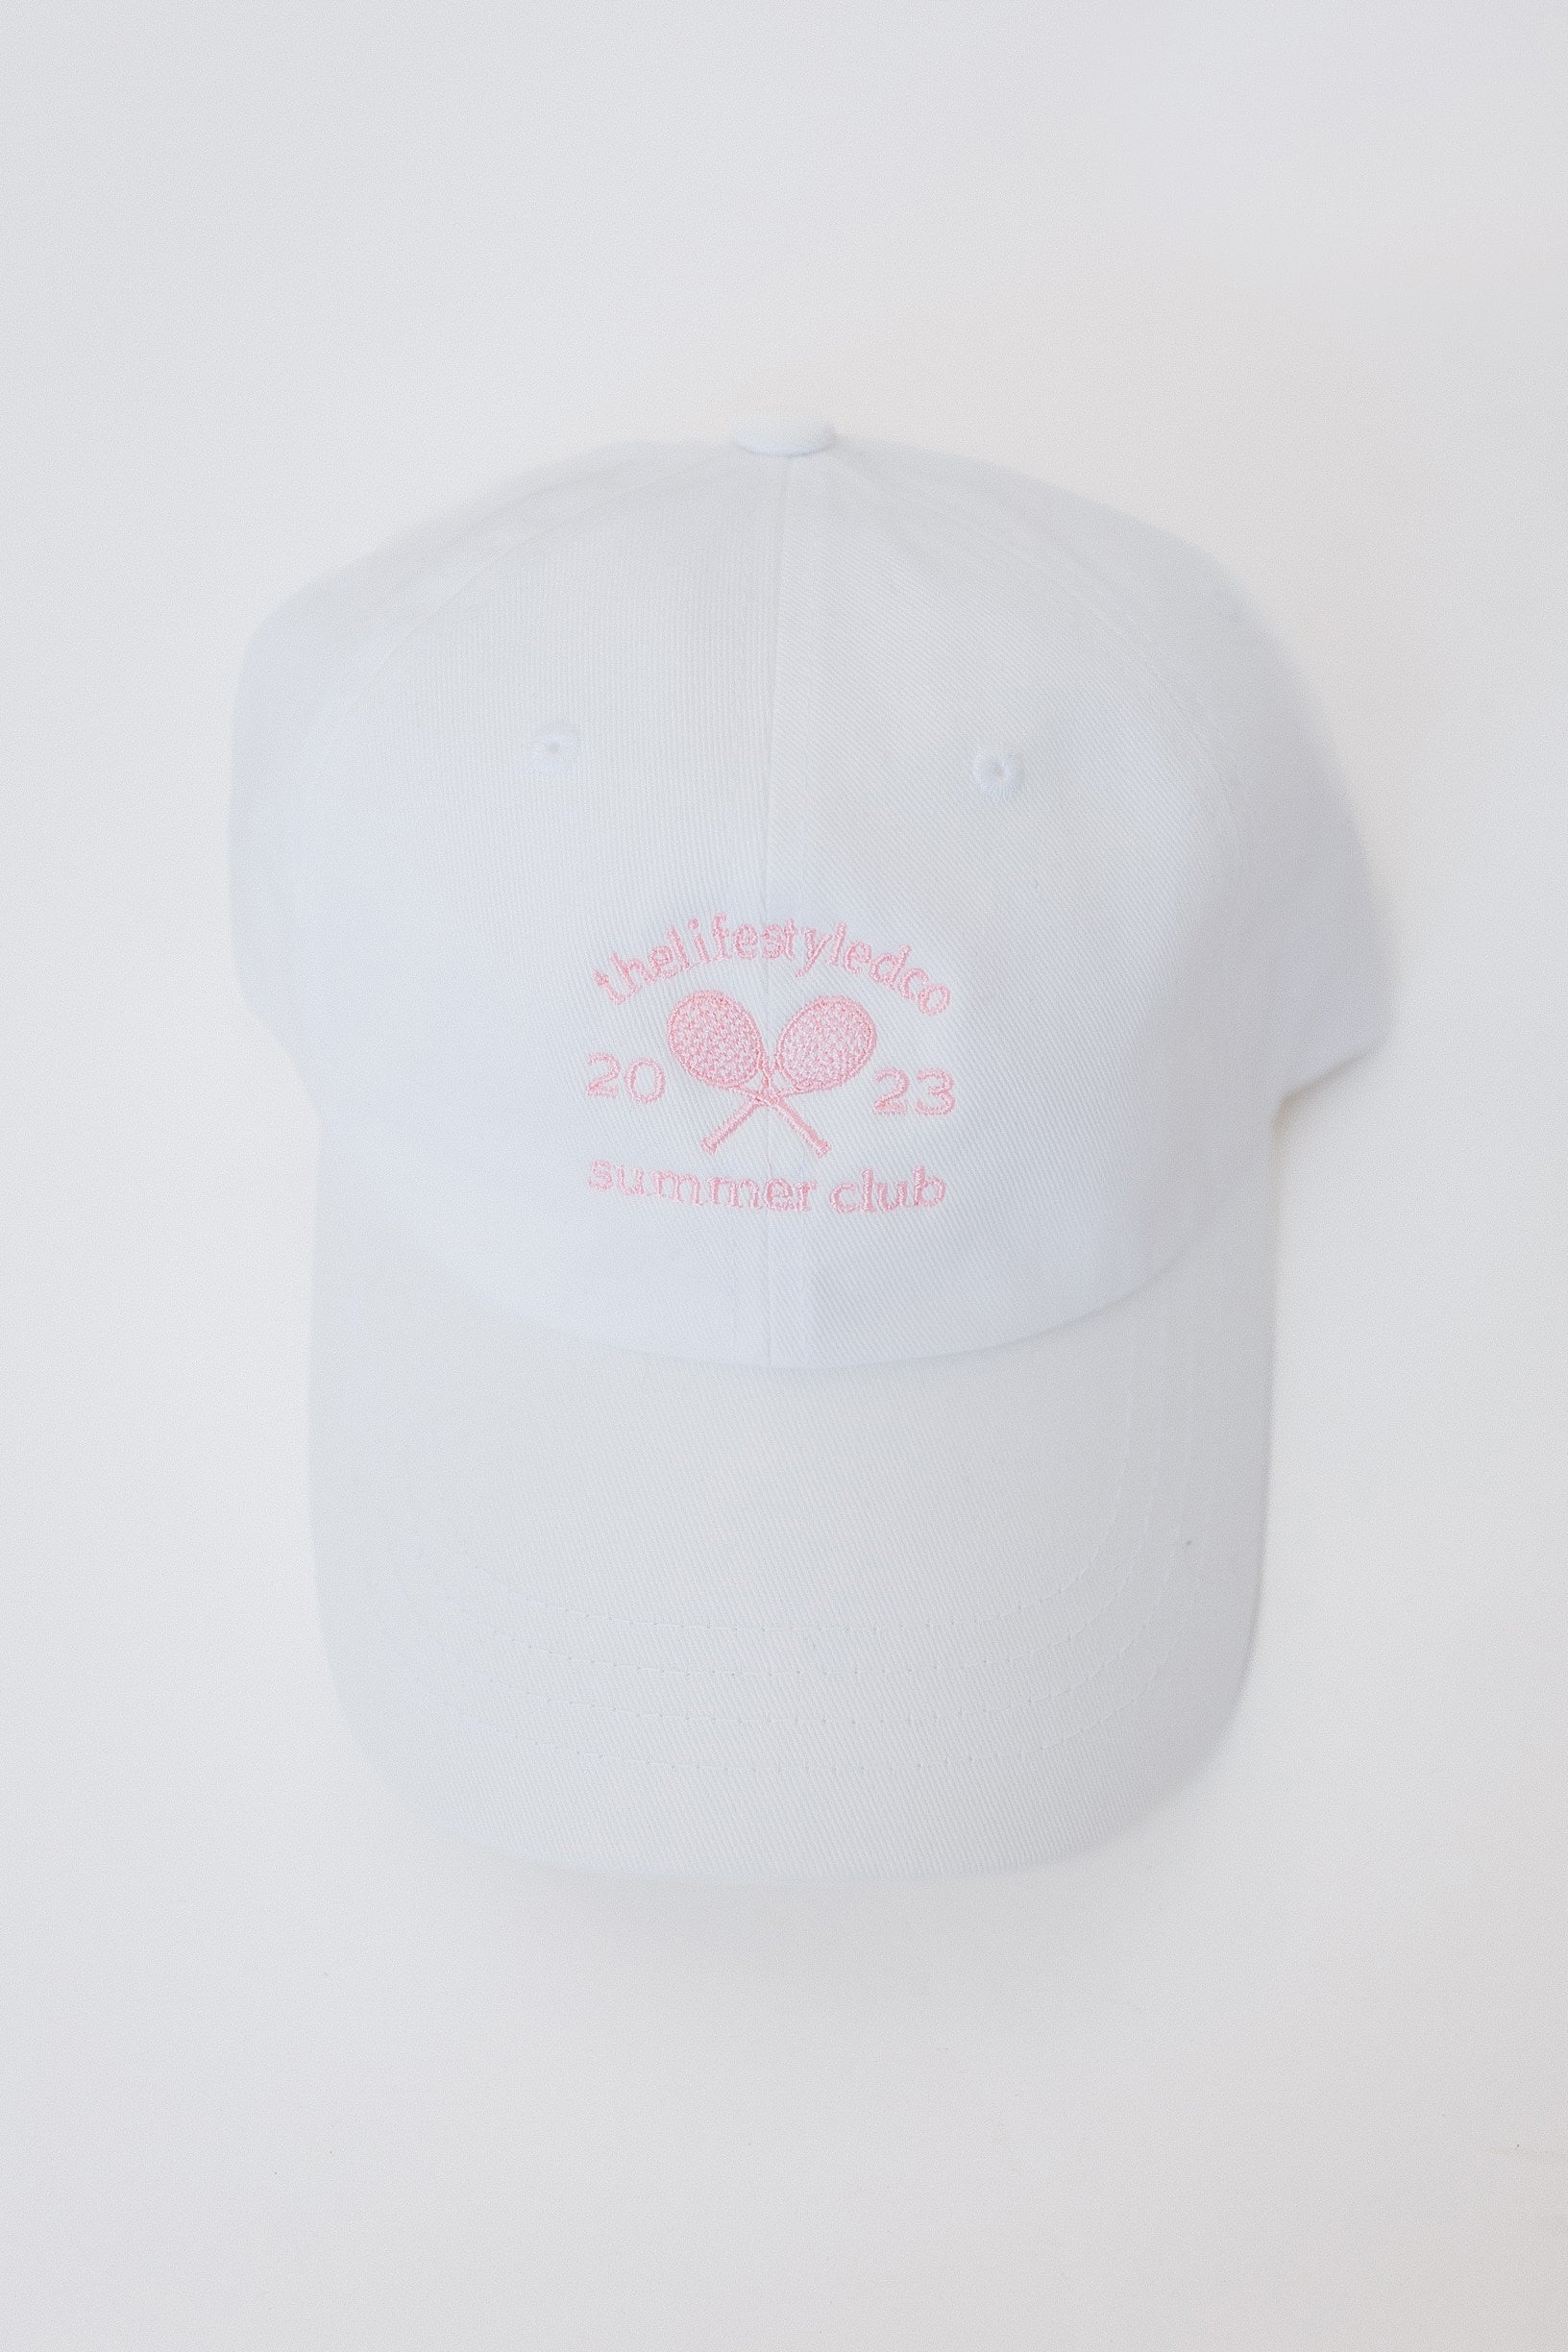 LCO Summer Club Dad Hat - 10 Colors